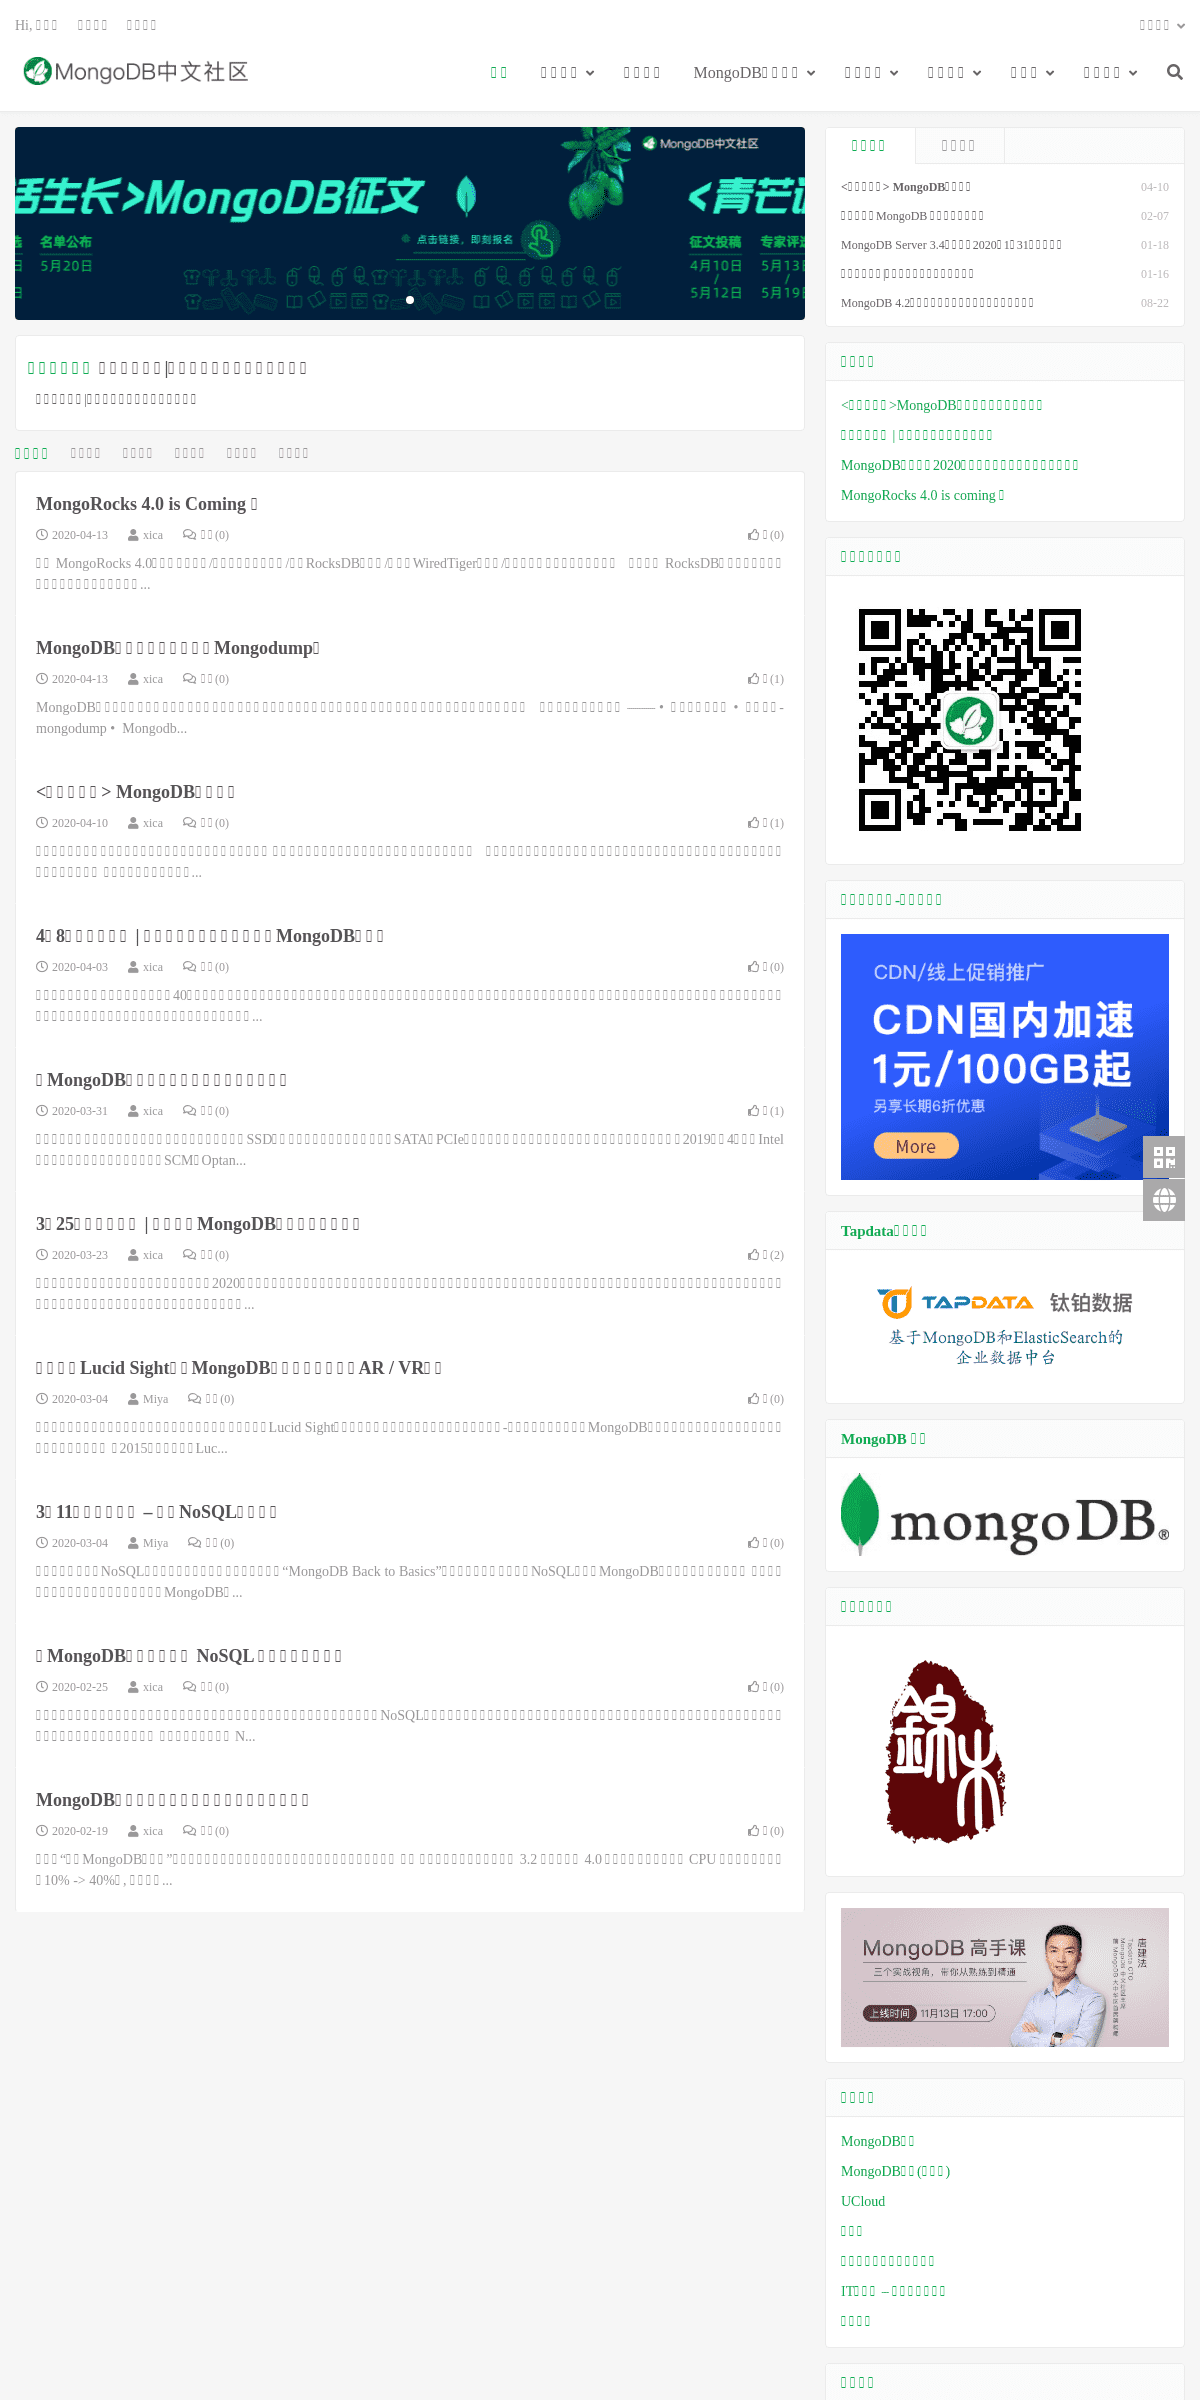 A complete backup of mongoing.com